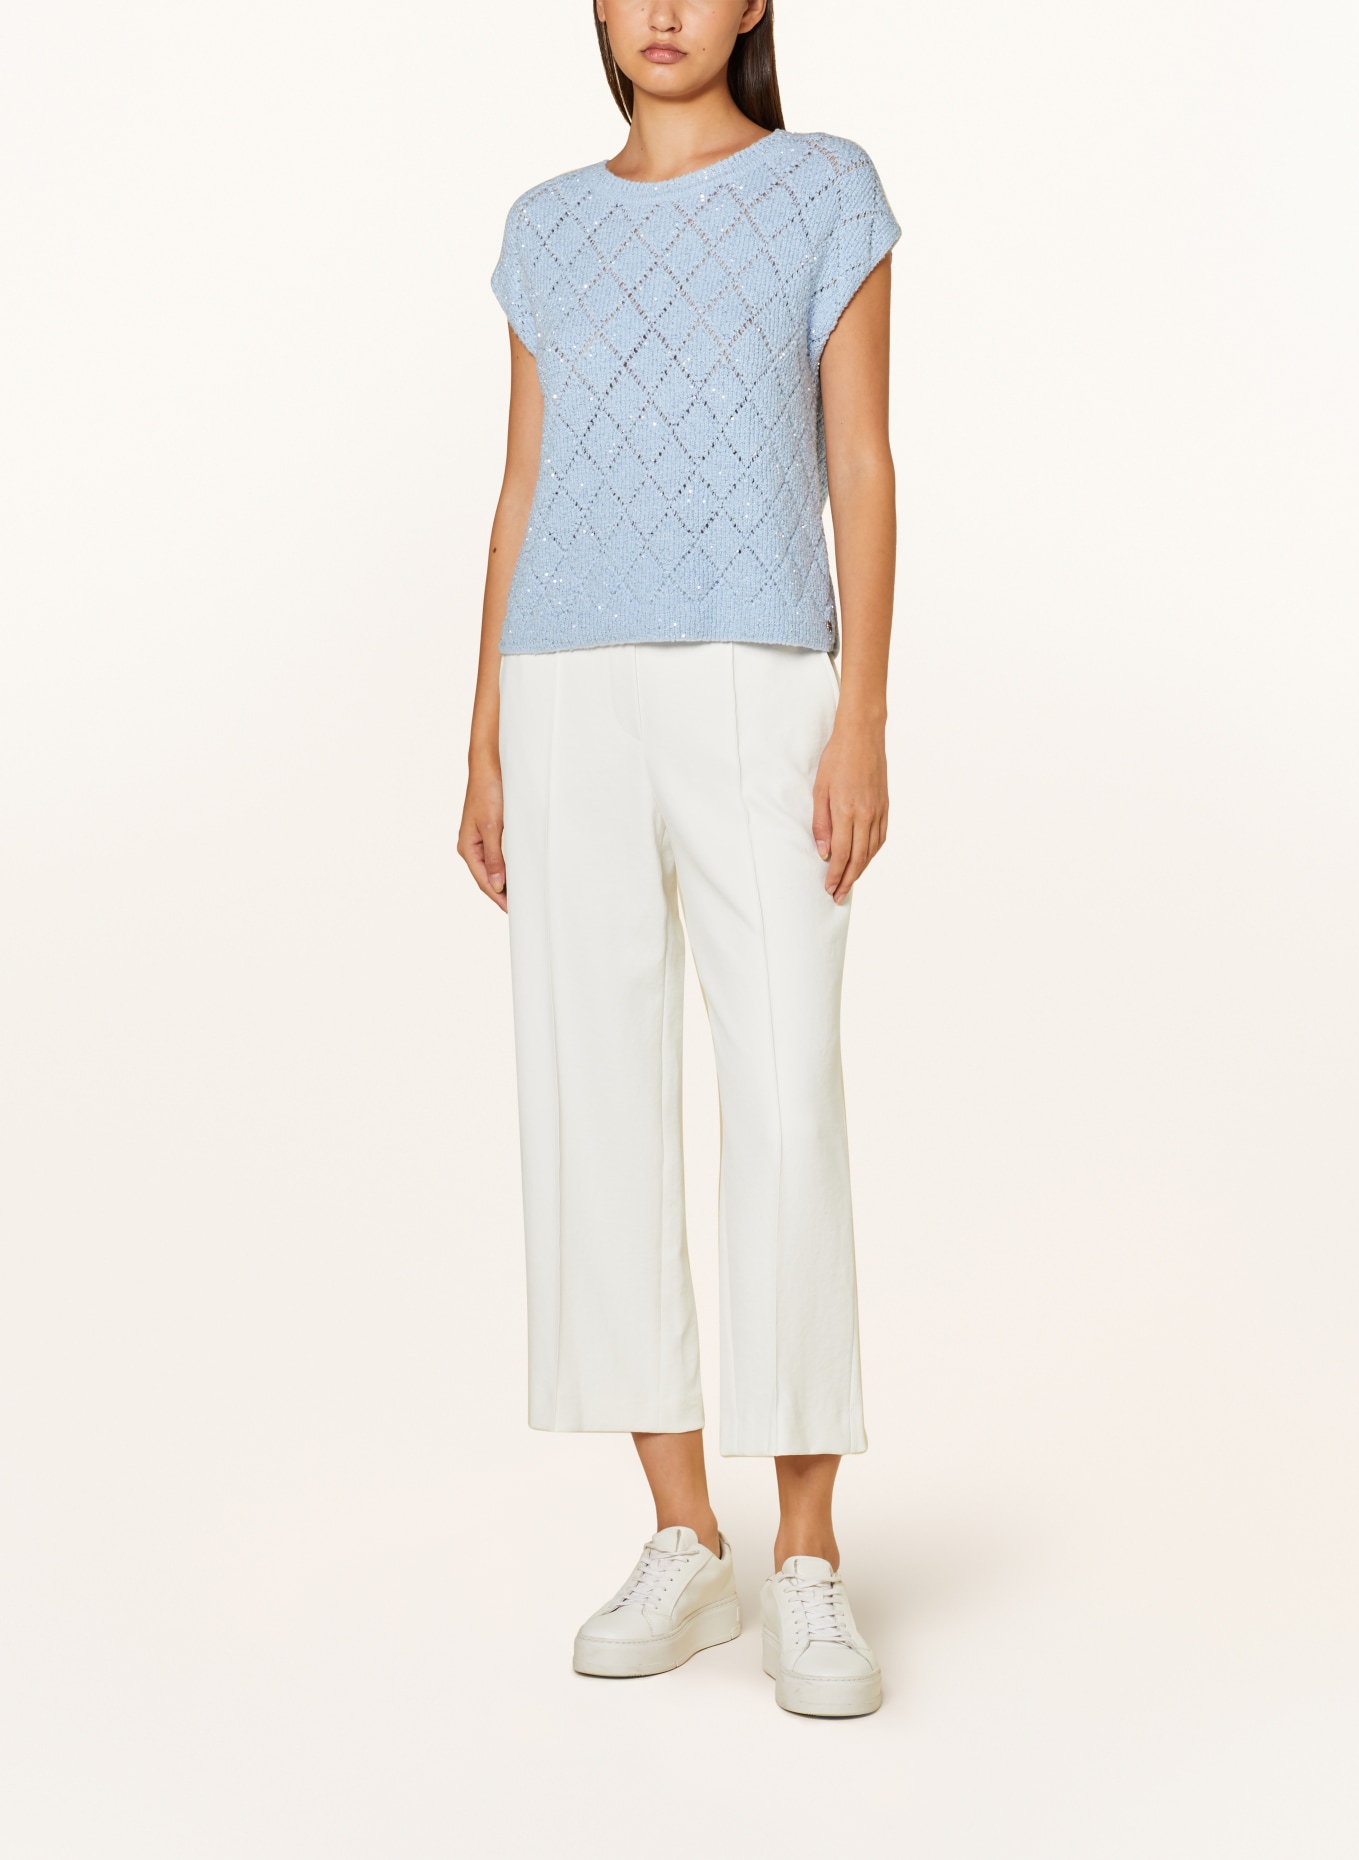 MARC CAIN Sweater vest with sequins, Color: 320 soft summer sky (Image 2)